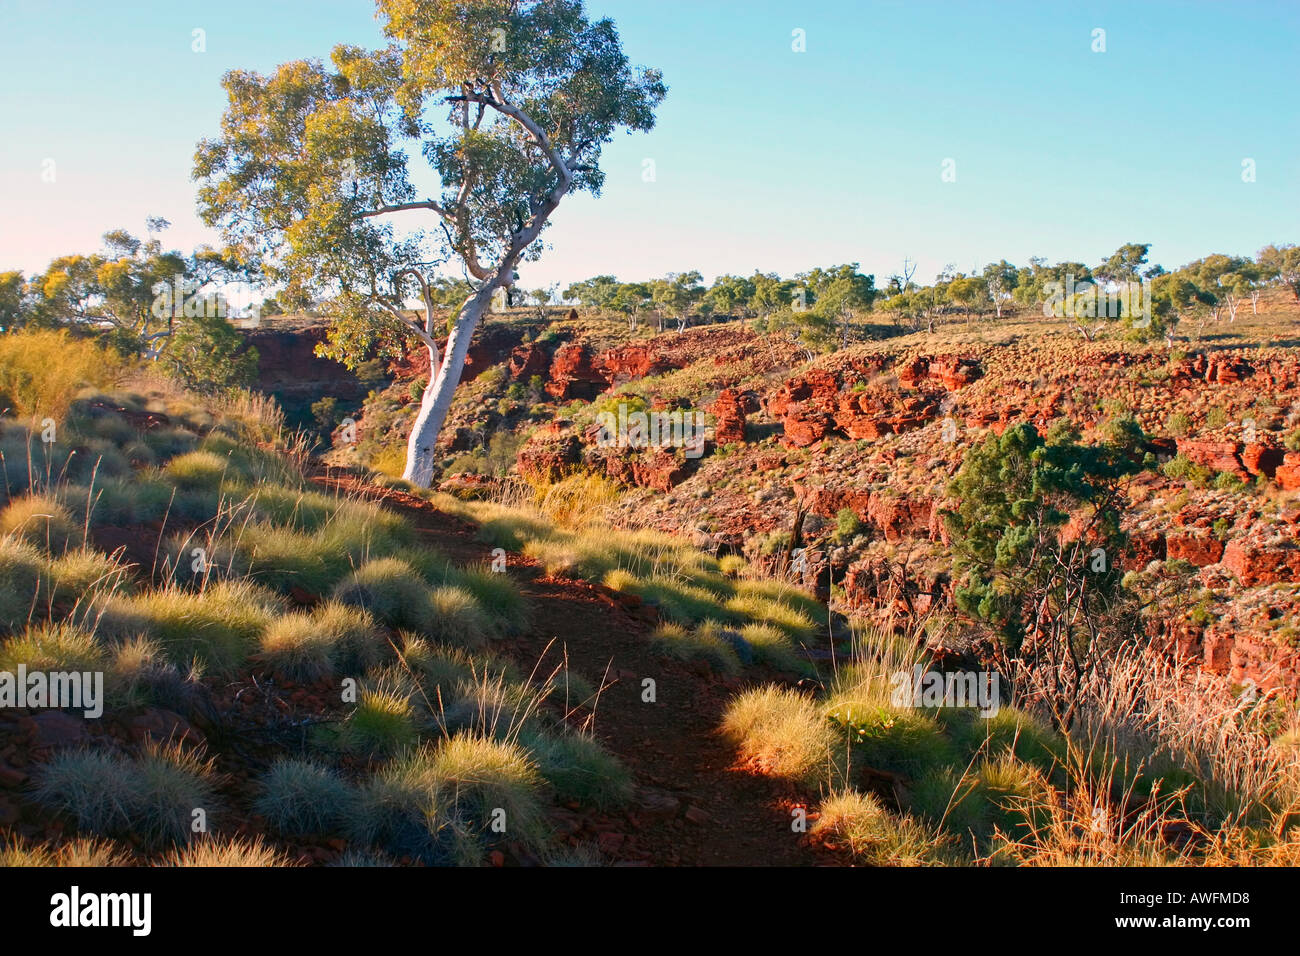 Spinifex and gum trees growing out of red soil around sheer cliffs in Karijini National Park near Tom Price Western Australia Stock Photo